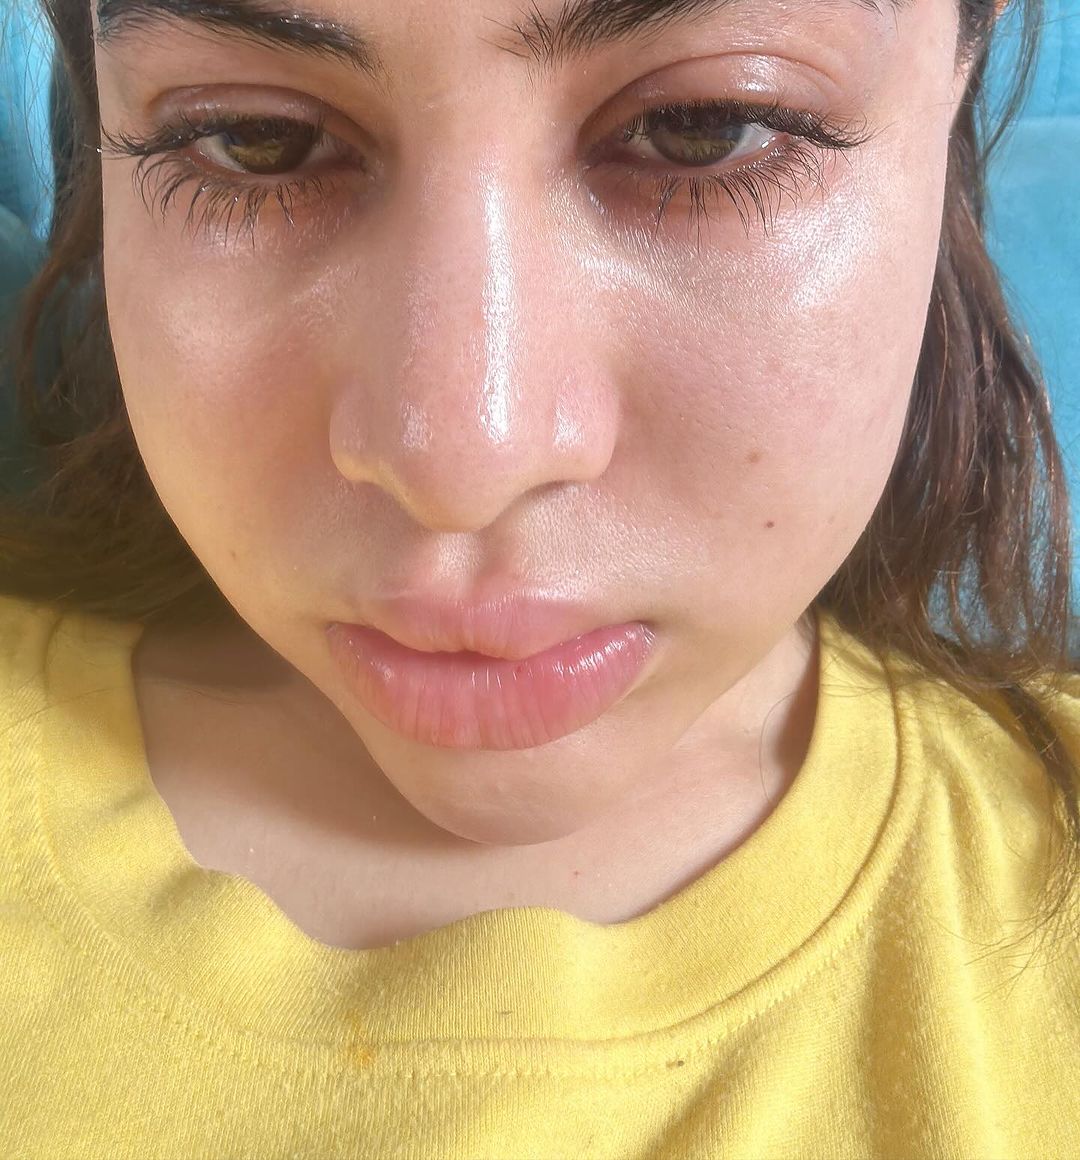 Bigg Boss OTT Fame Uorfi Javed Latest Post Grabbed Attention For Sharing Her Swollen Face. Look Over to Know What Caused Her To This Condition!